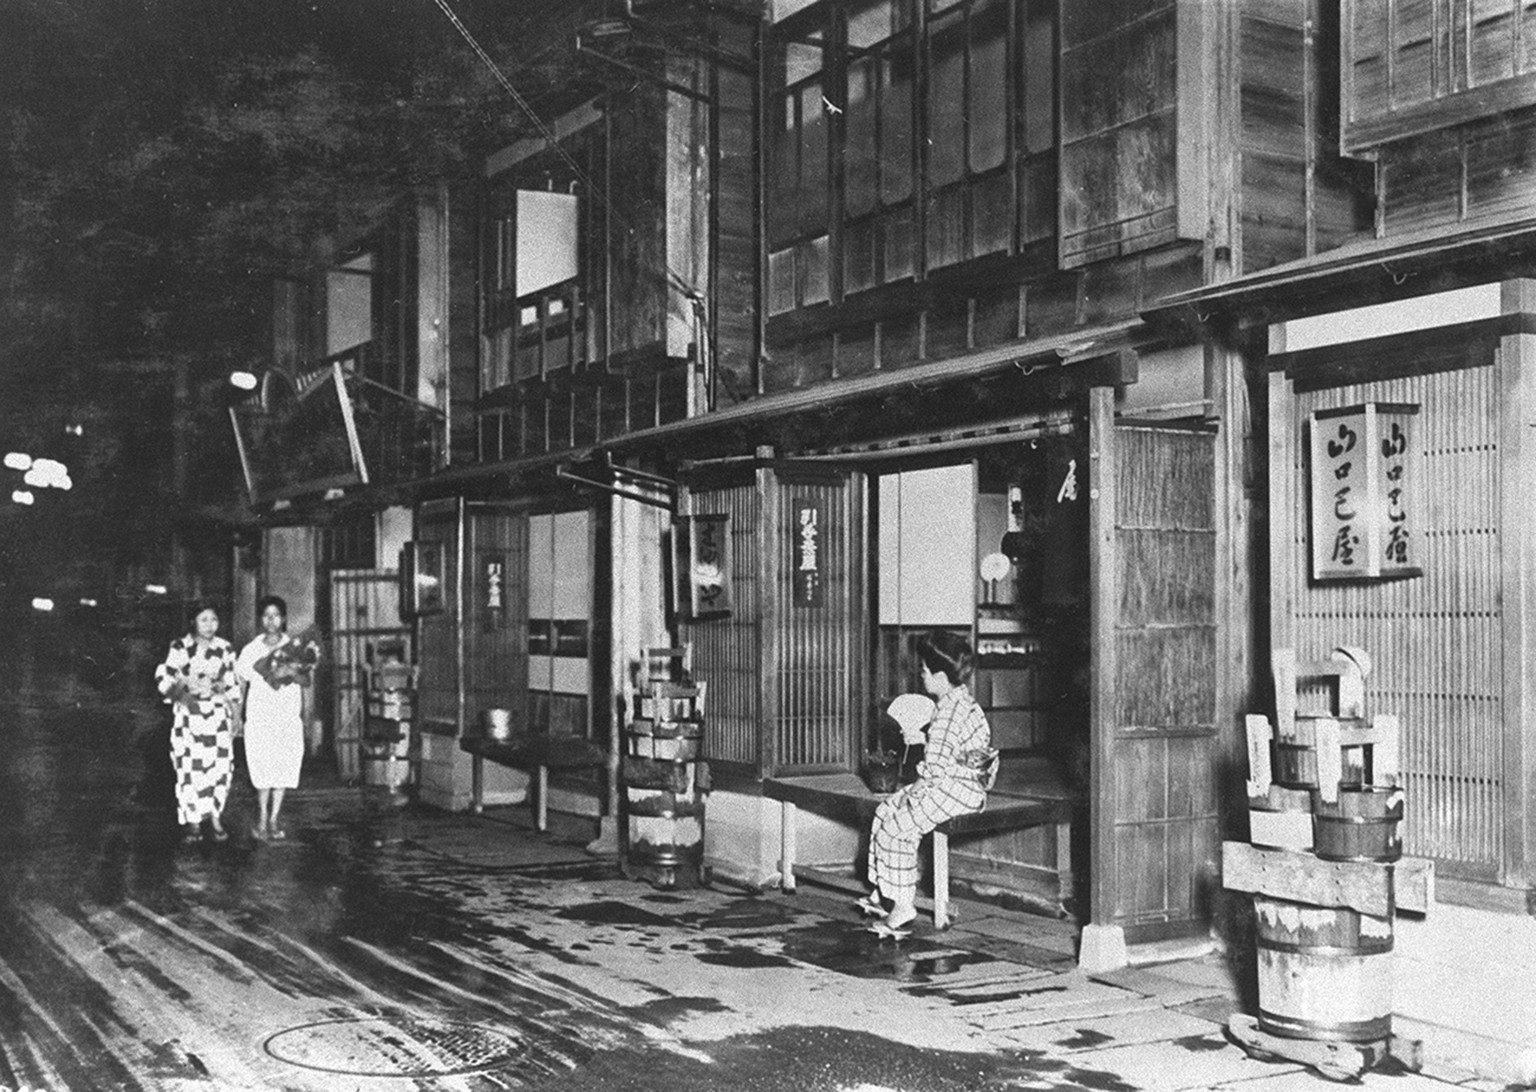 TOKYO, Japan - The file photo shows teahouses in Yoshiwara, which was Japan&#039;s largest licensed red-light district until prostitution was banned in 1957, located in Tokyo. The undated photo was ta ...